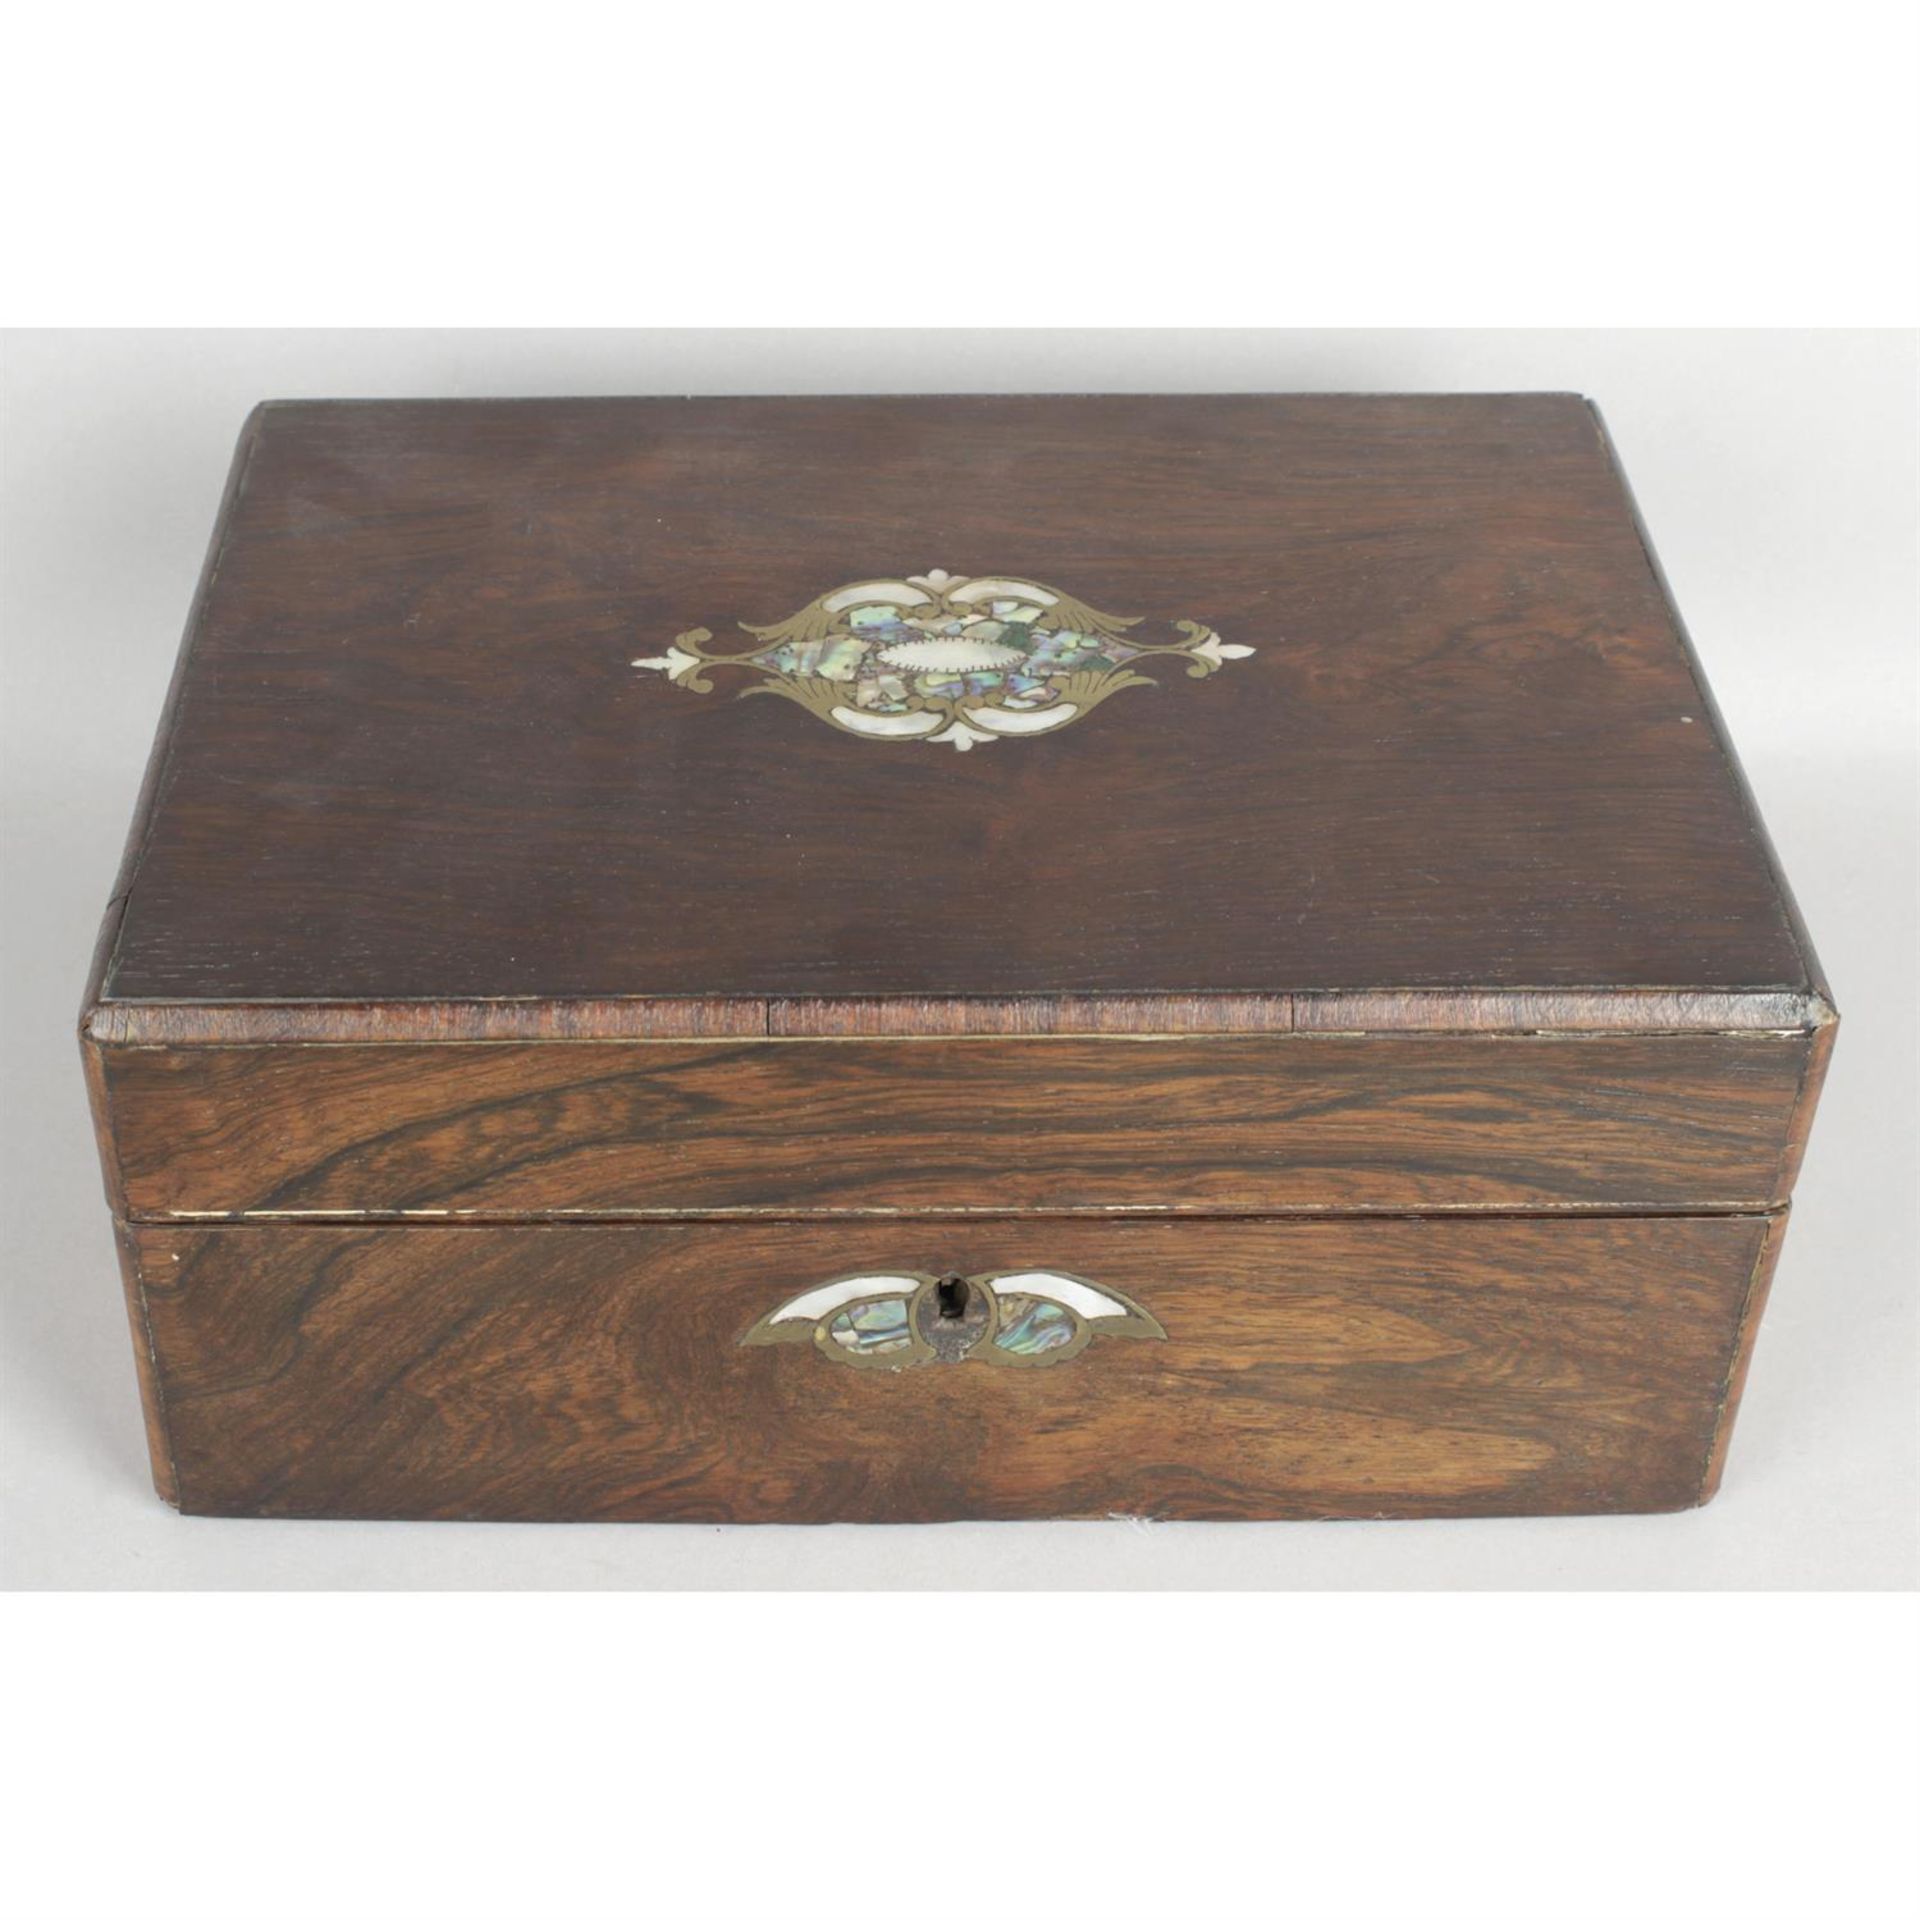 A late 19th century sewing box.